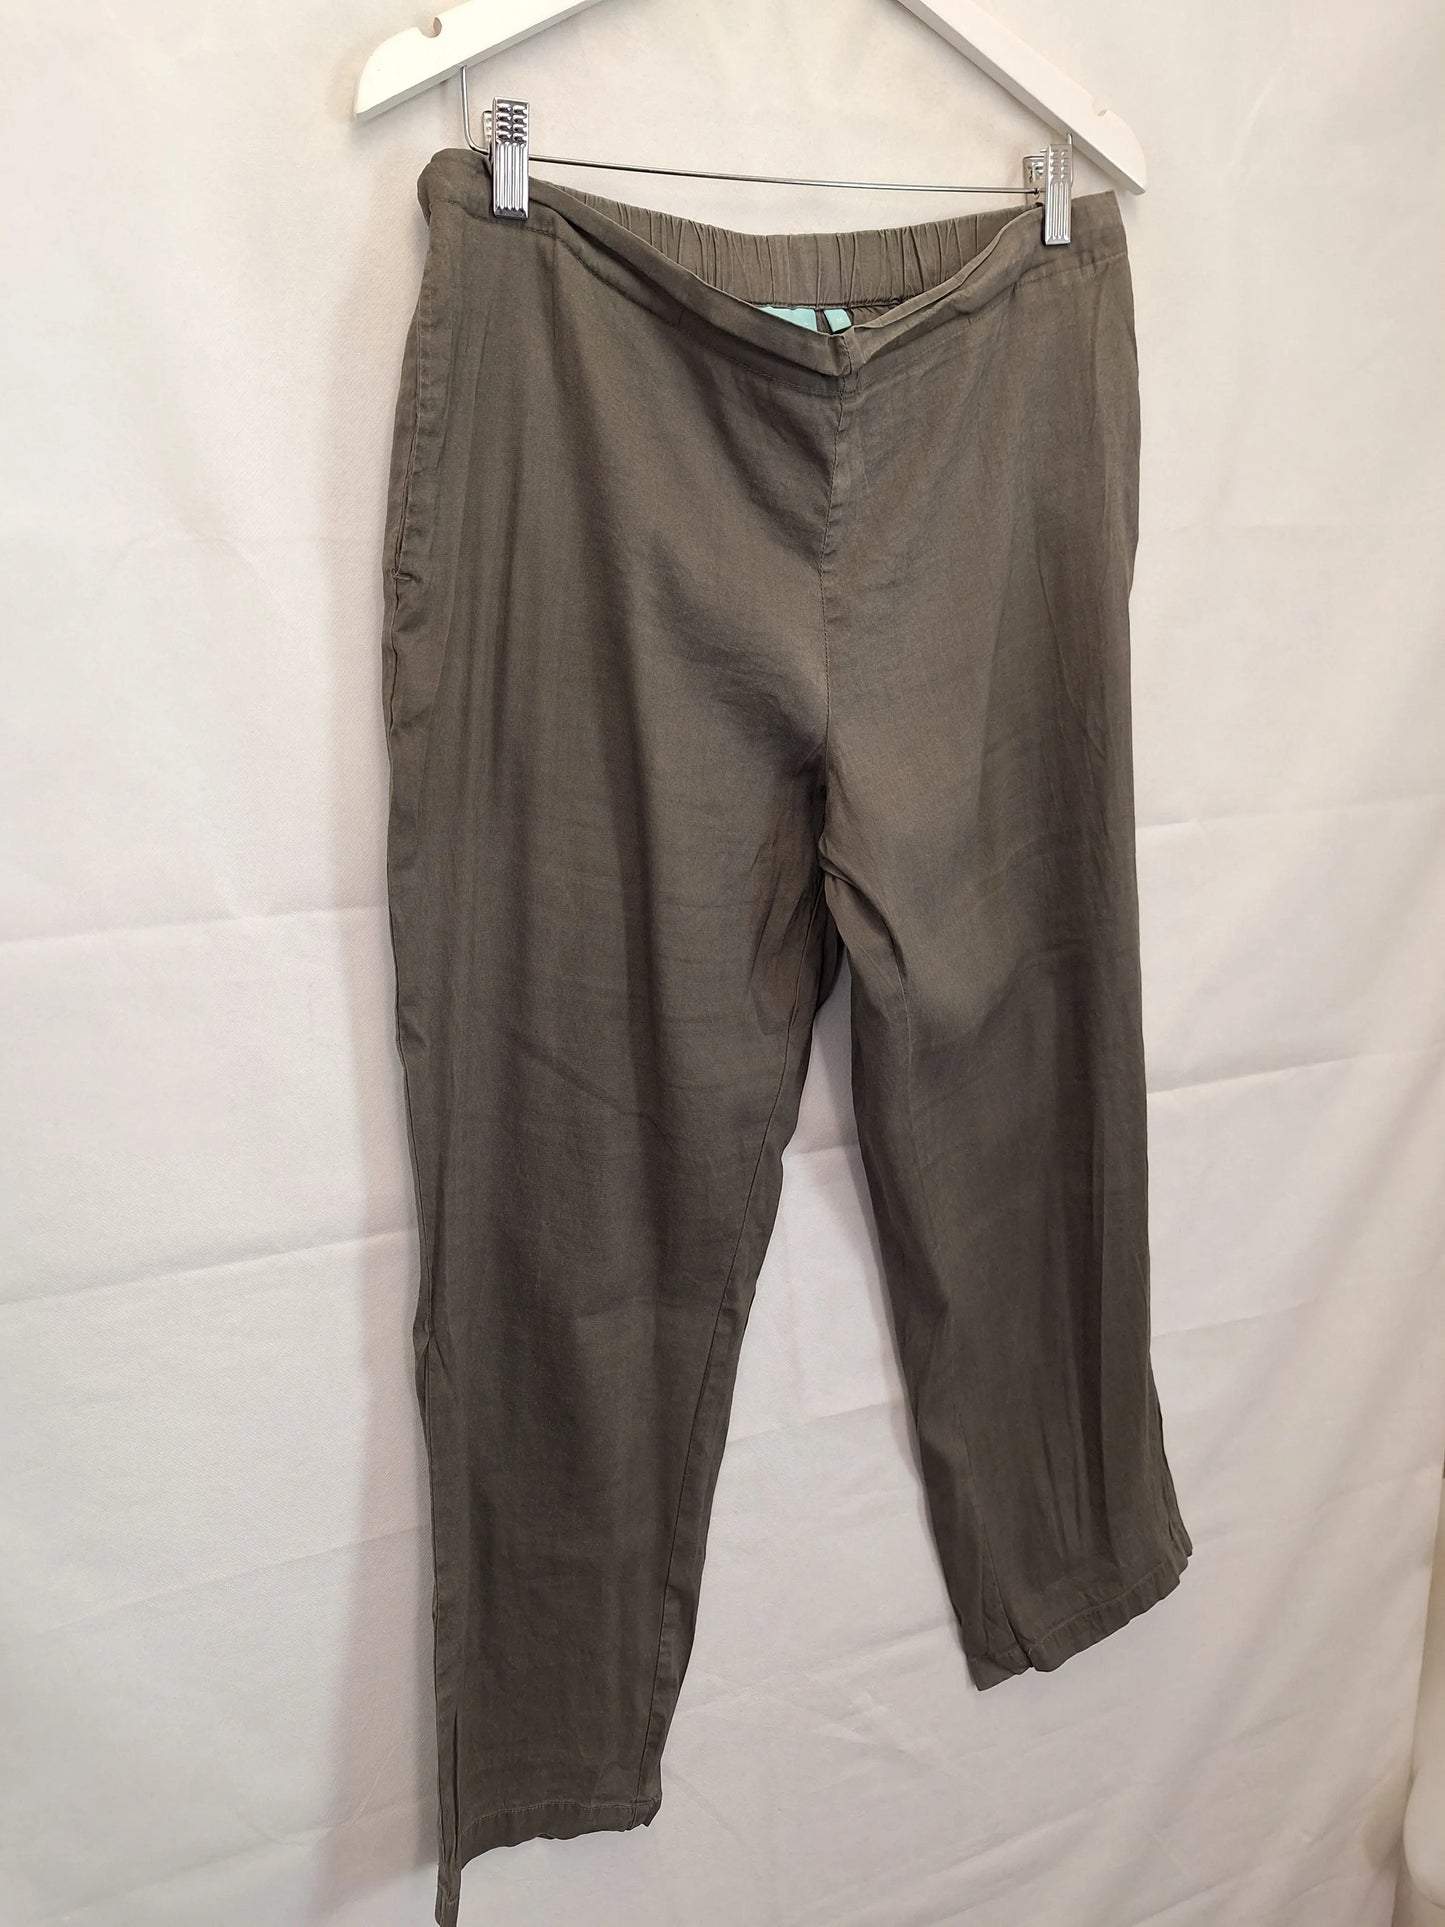 Blue Illusion Summer Light  Casual Pants Size M by SwapUp-Online Second Hand Store-Online Thrift Store